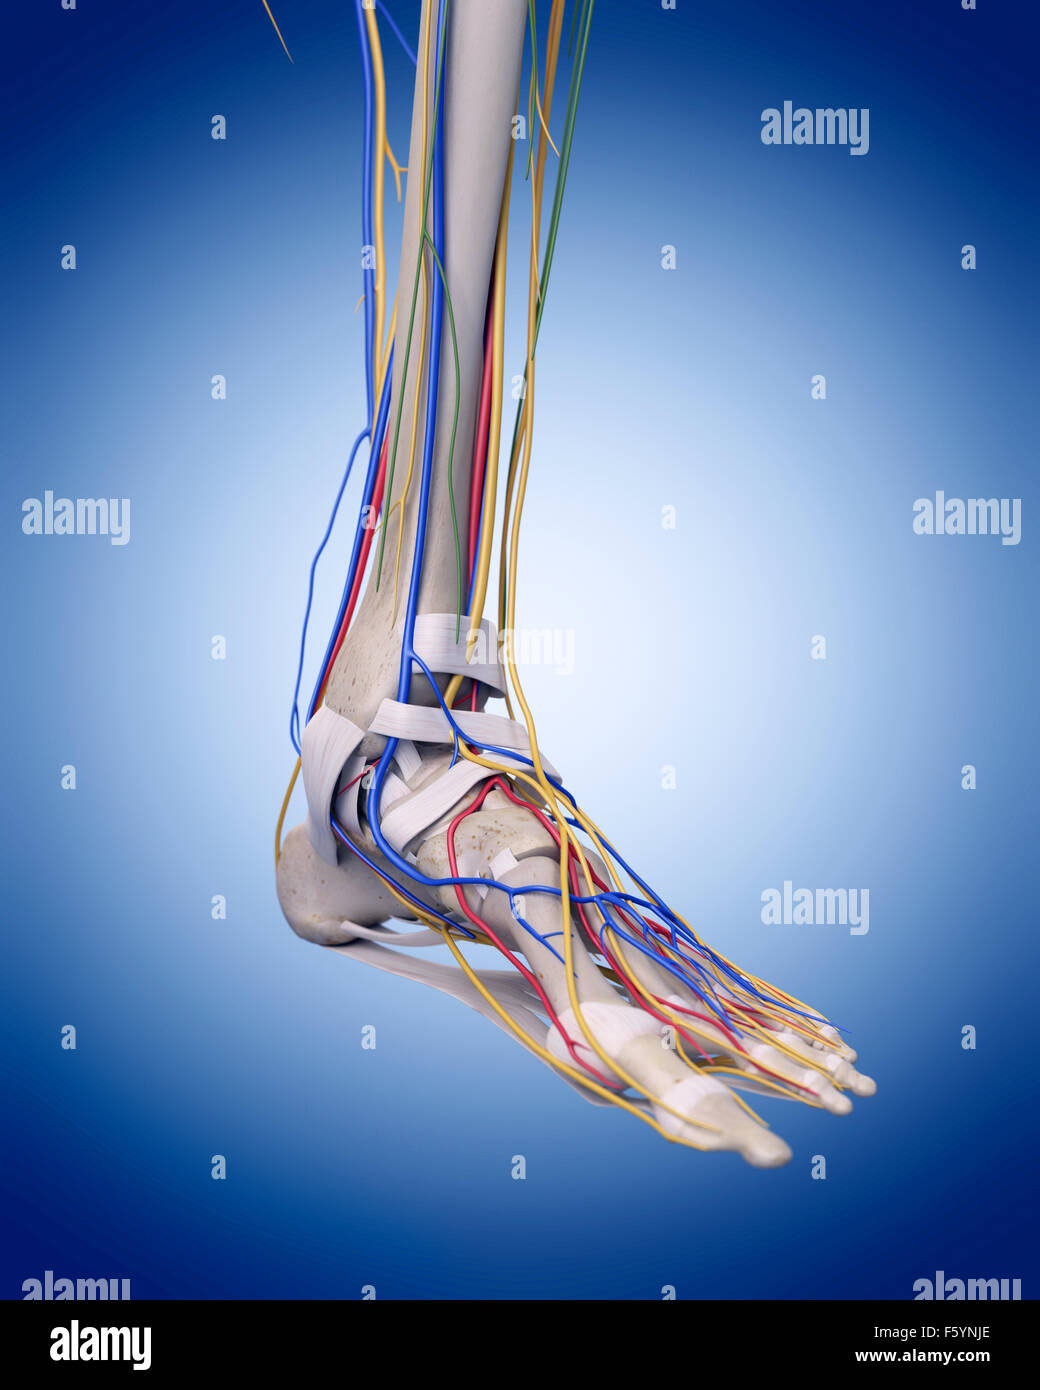 medically accurate illustration of the foot anatomy Stock Photo